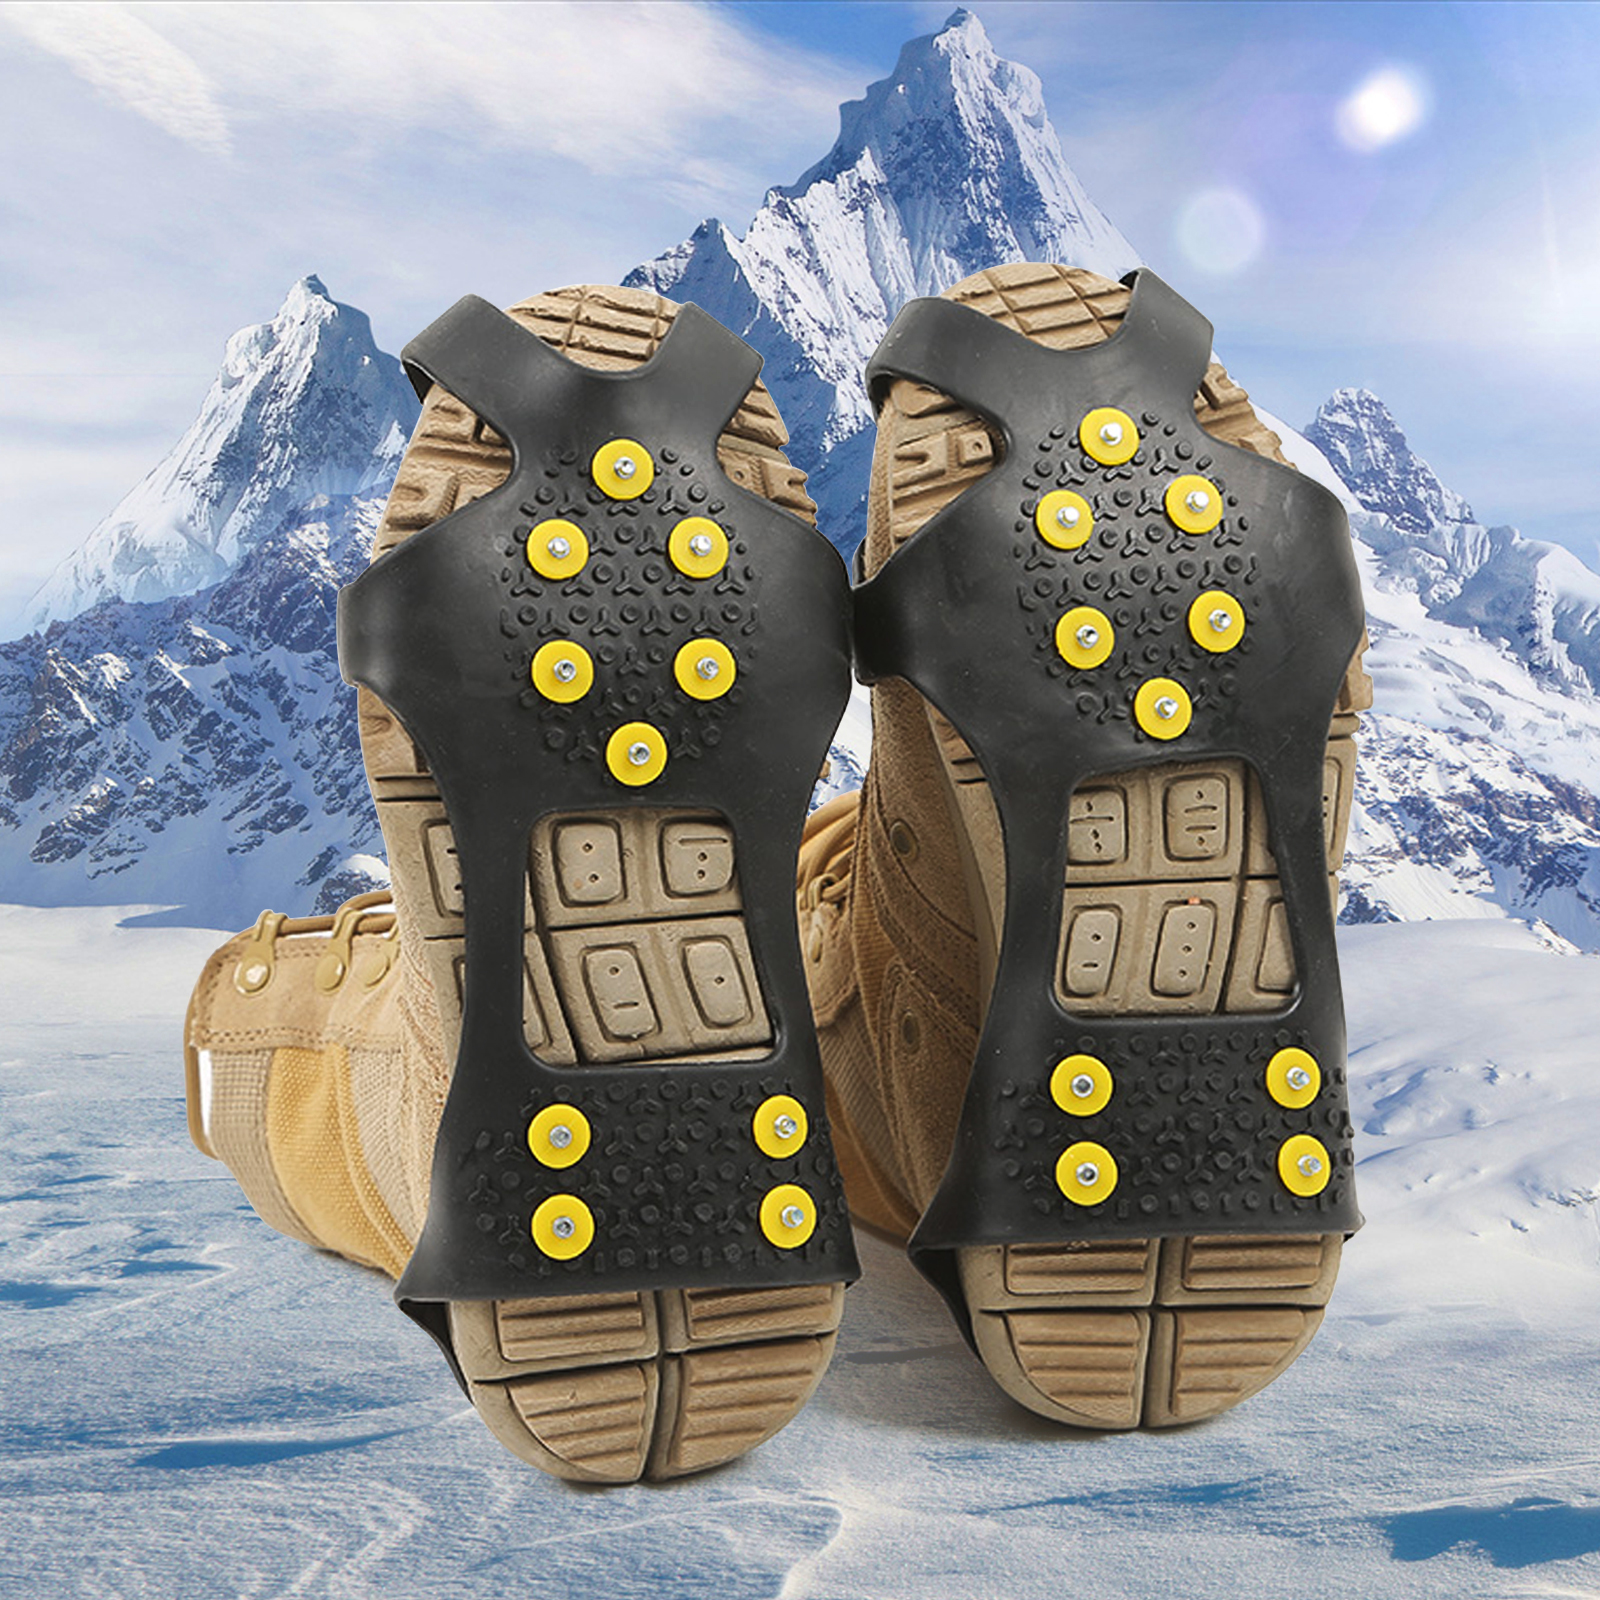 AGPtek Anti Slip Grip Shoe Covers Overshoes Snow Shoes Crampons Cleats for Ice Snow XL - image 4 of 7